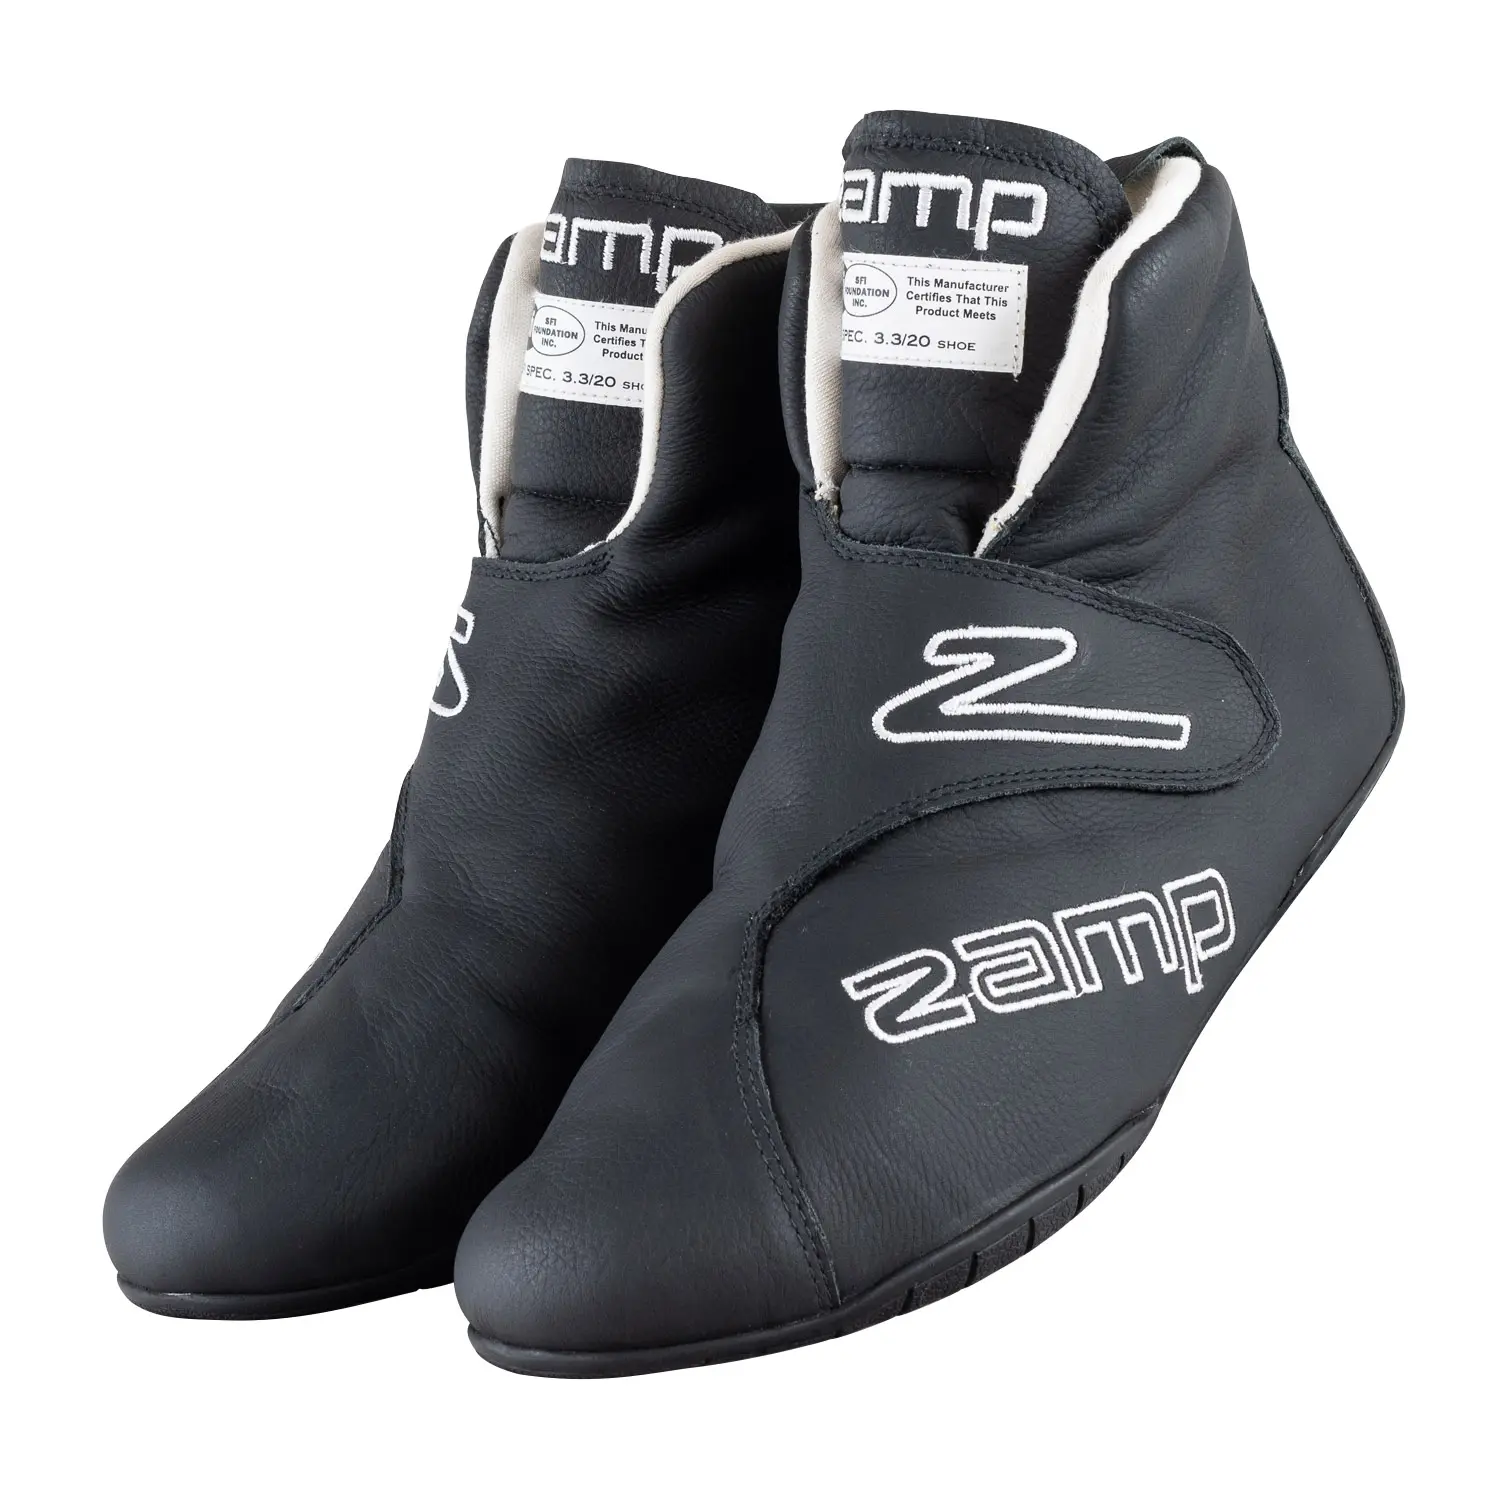 ZR-Drag Racing Shoes